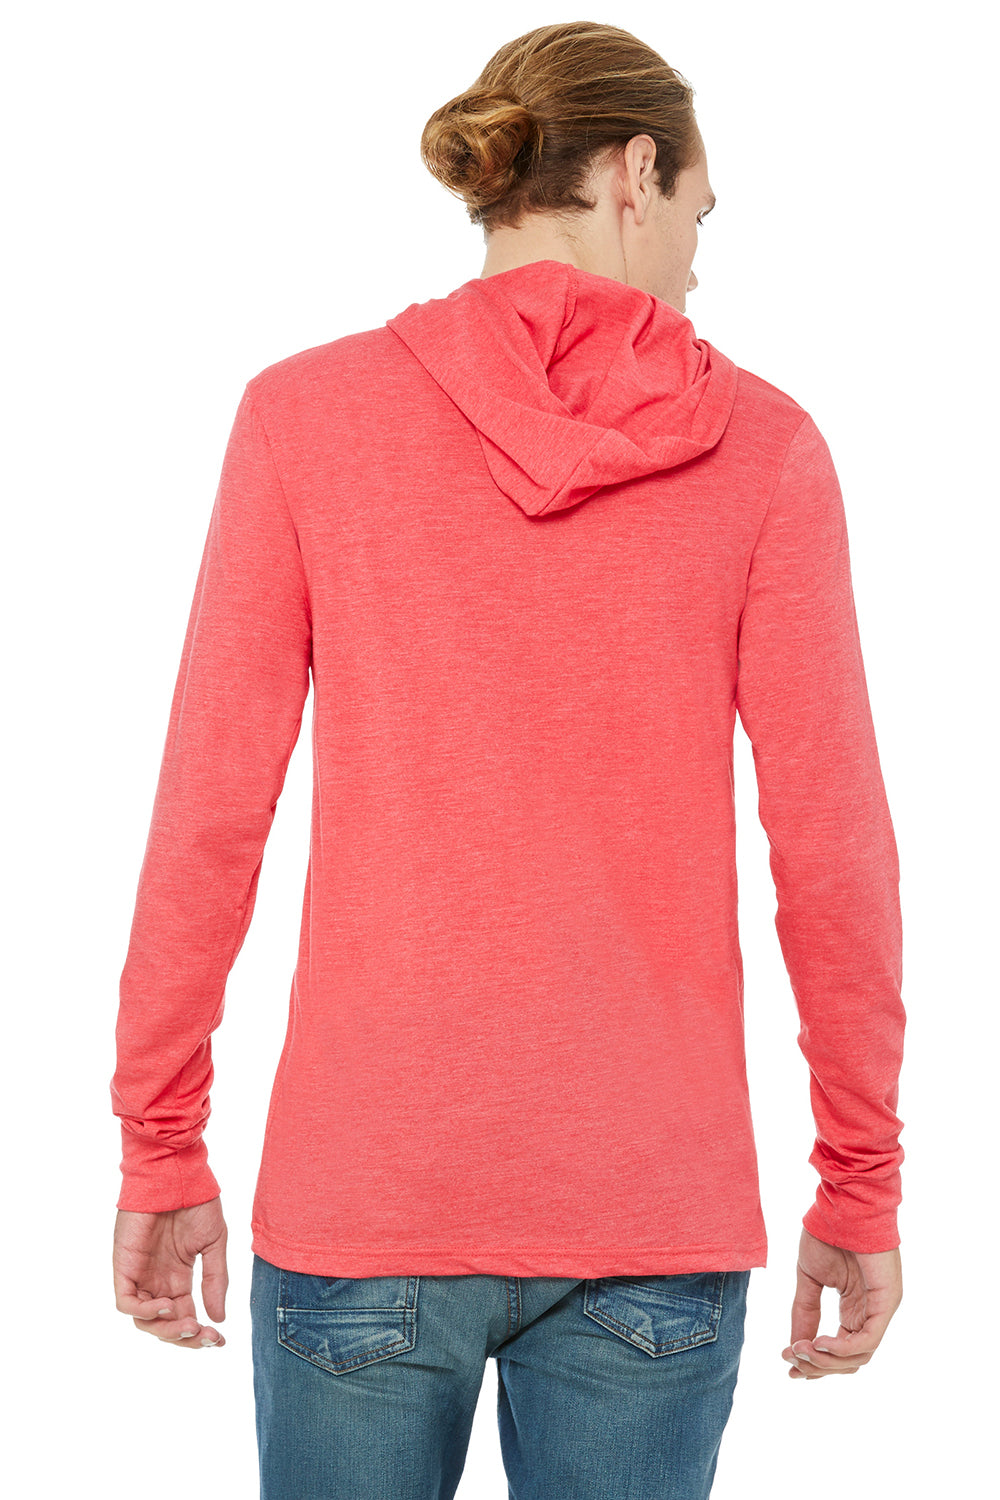 Bella + Canvas BC3512/3512 Mens Jersey Long Sleeve Hooded T-Shirt Hoodie Heather Red Model Back